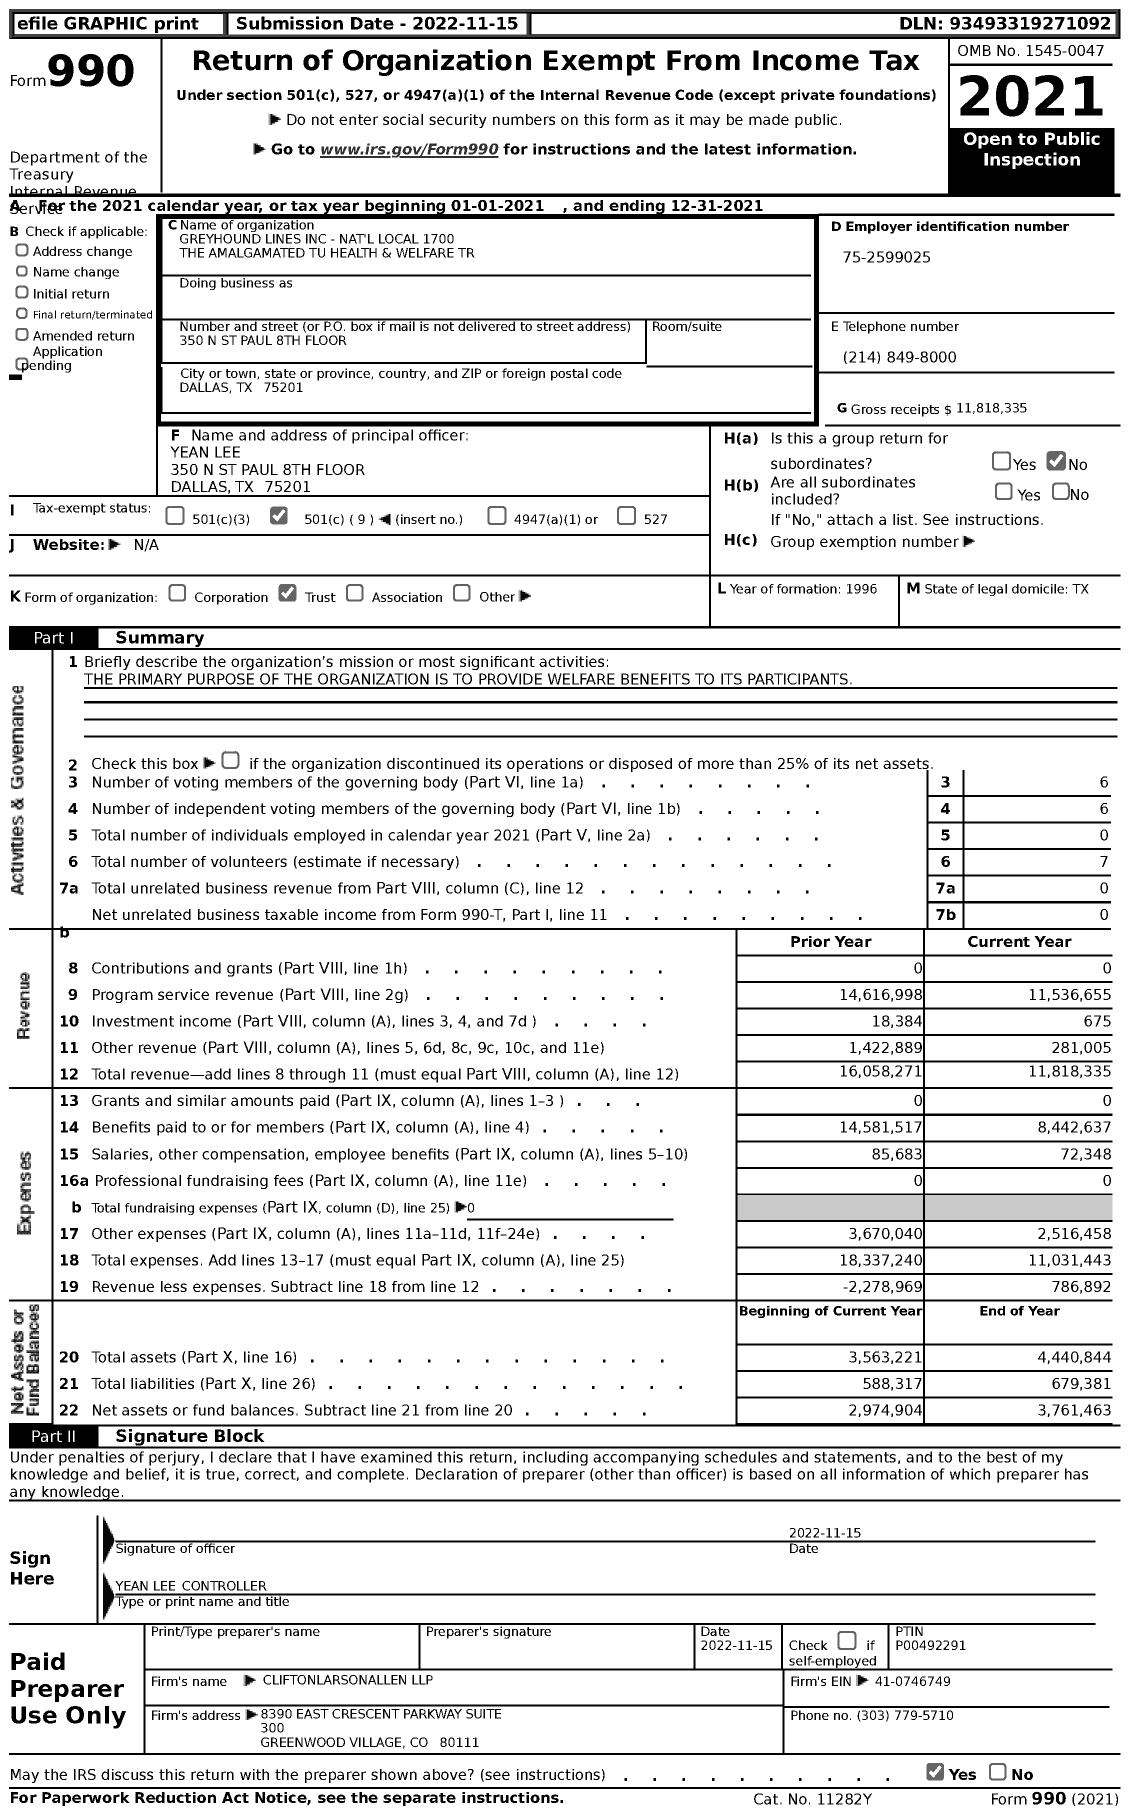 Image of first page of 2021 Form 990 for Greyhound Lines - Nat'l Local 1700 the Amalgamated Tu Health and Welfare Trust